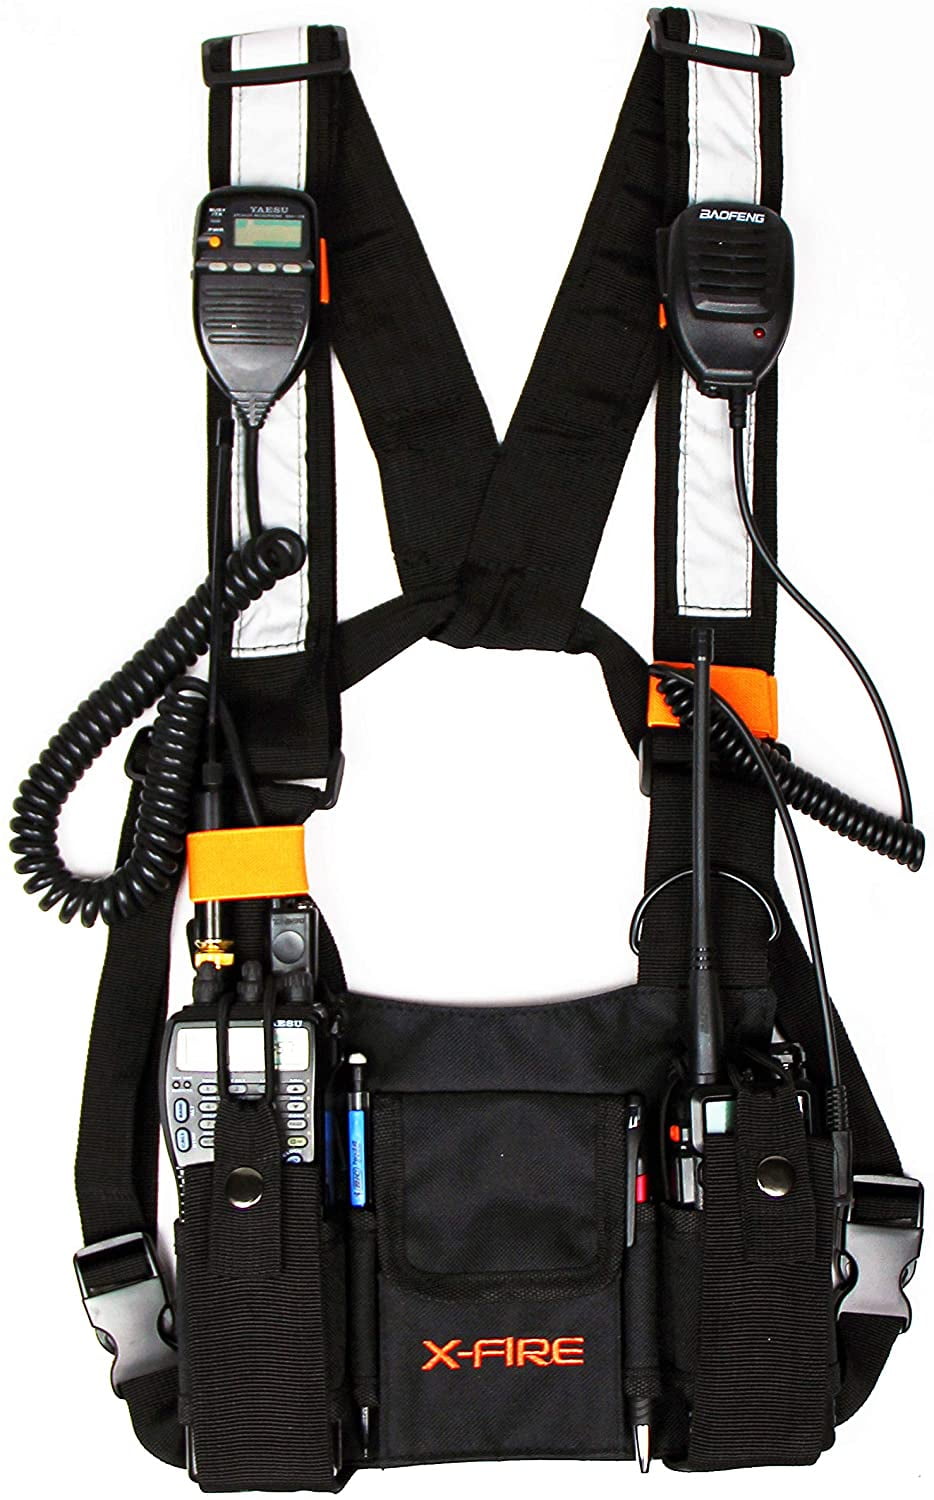 Reflective Radio Chest Harness Two Way Walkie Talkie Rescue Pocket Vest Rig Chic 